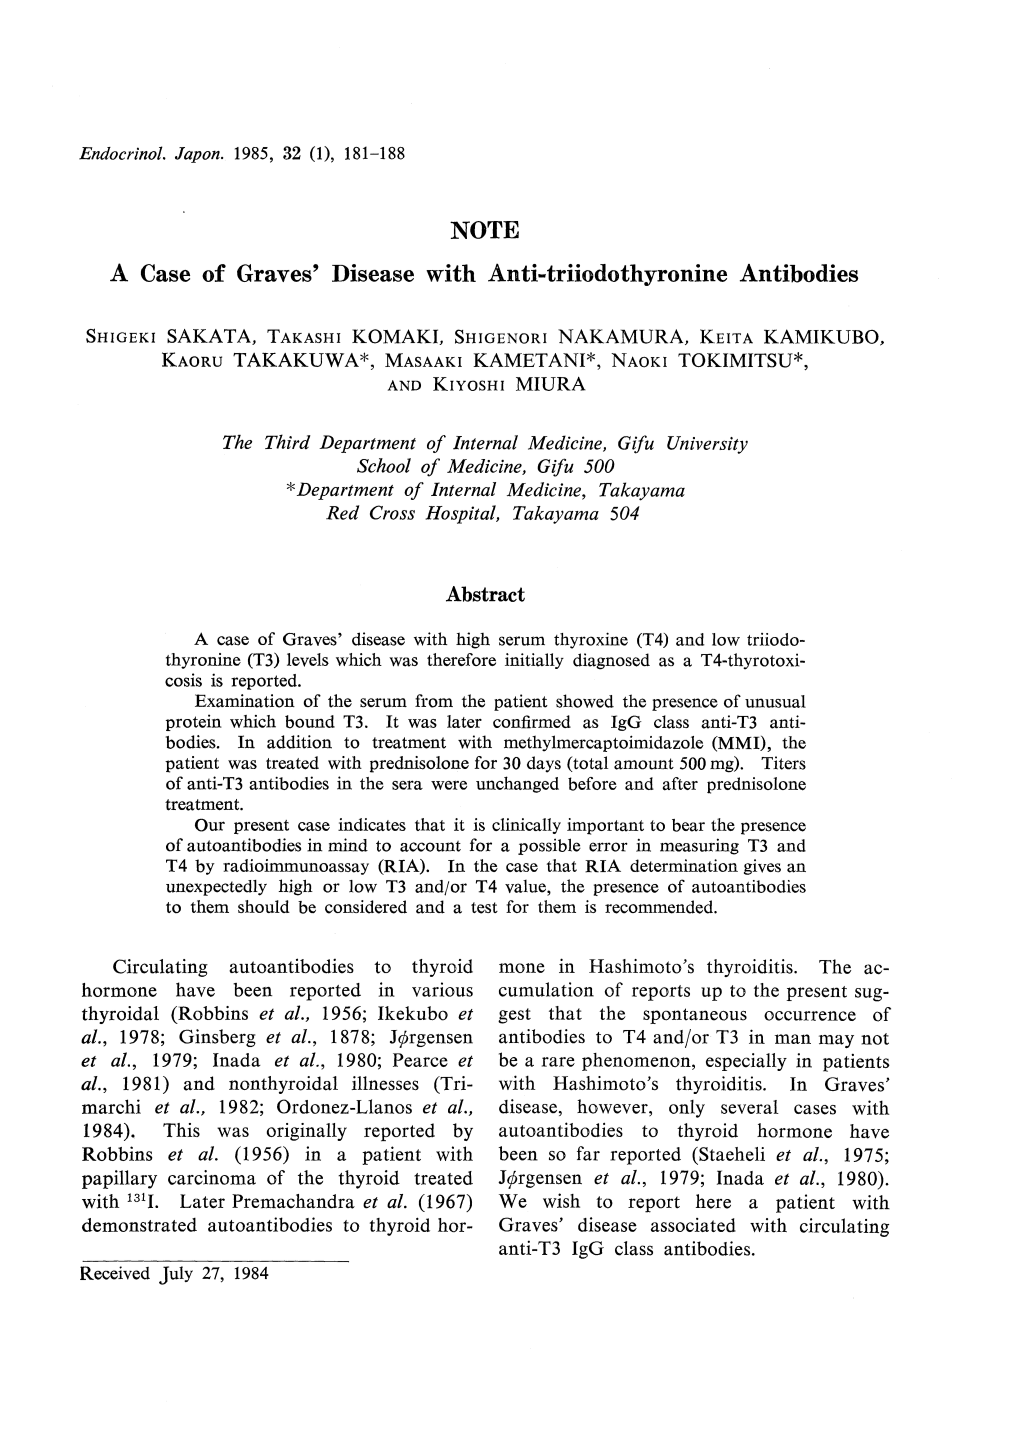 NOTE a Case of Graves' Disease with Anti-Triiodothyronine Antibodies The